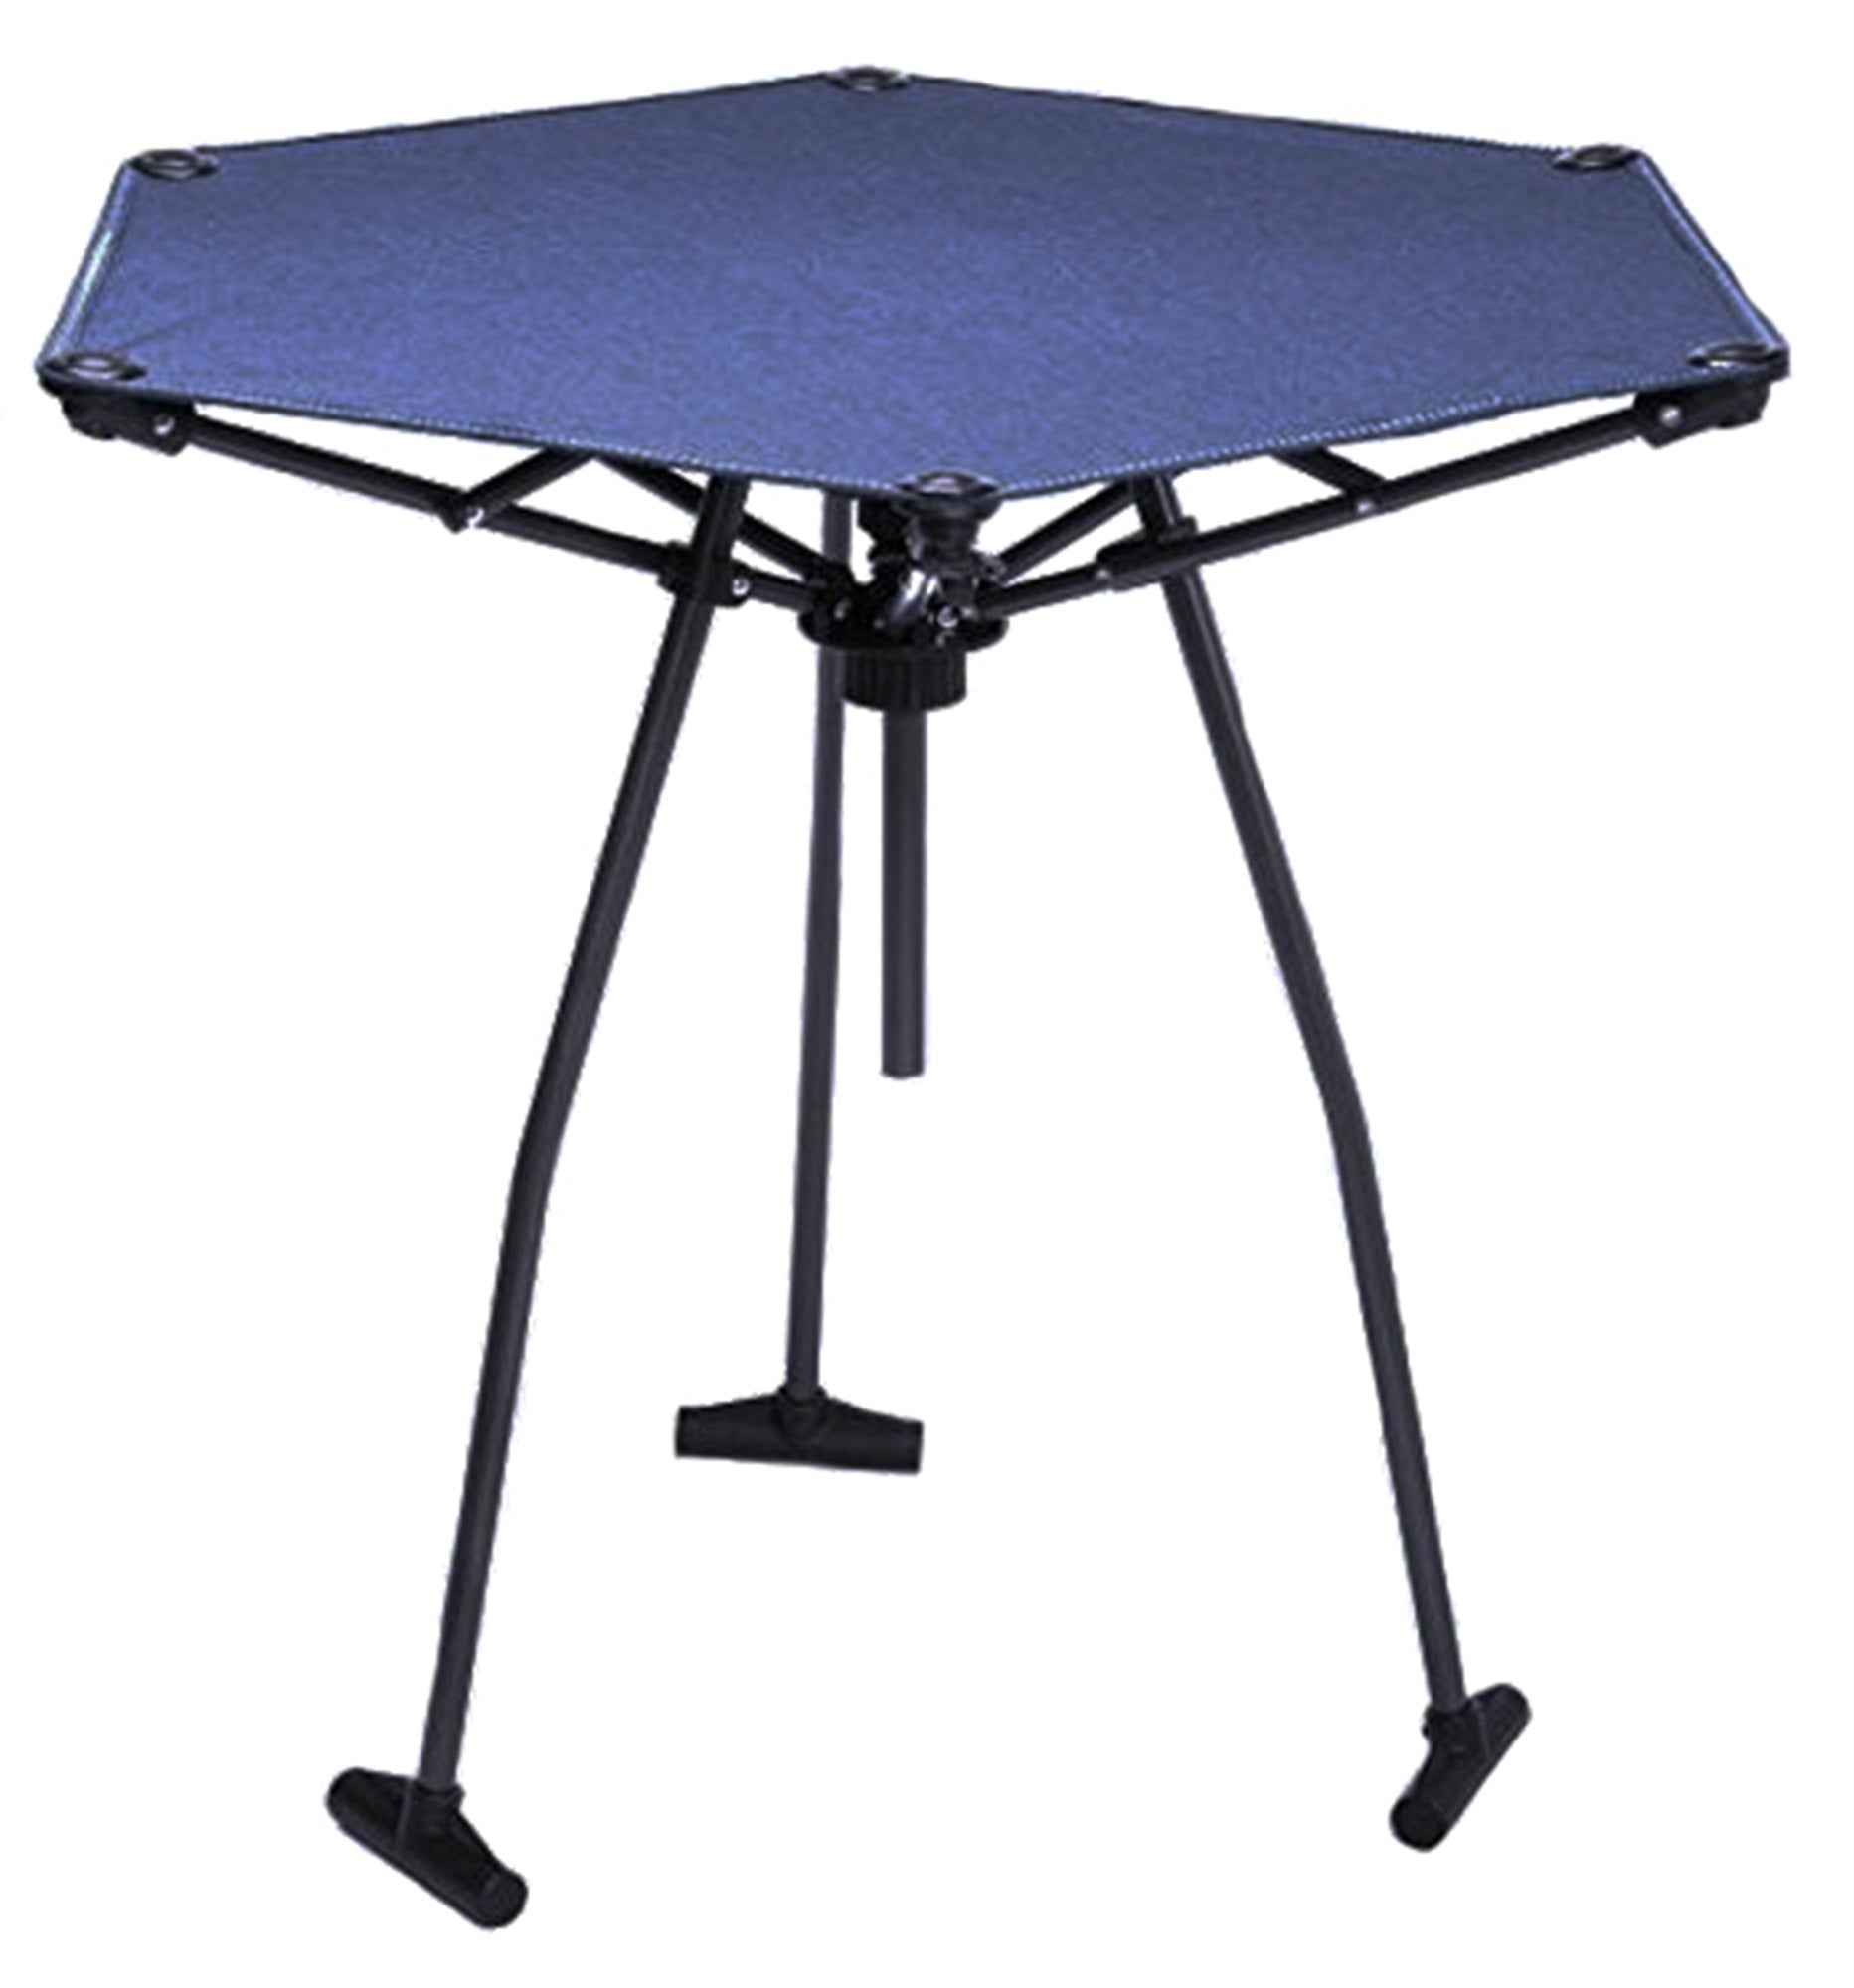 Zenithen Limited High Tension Hex Table, Blue